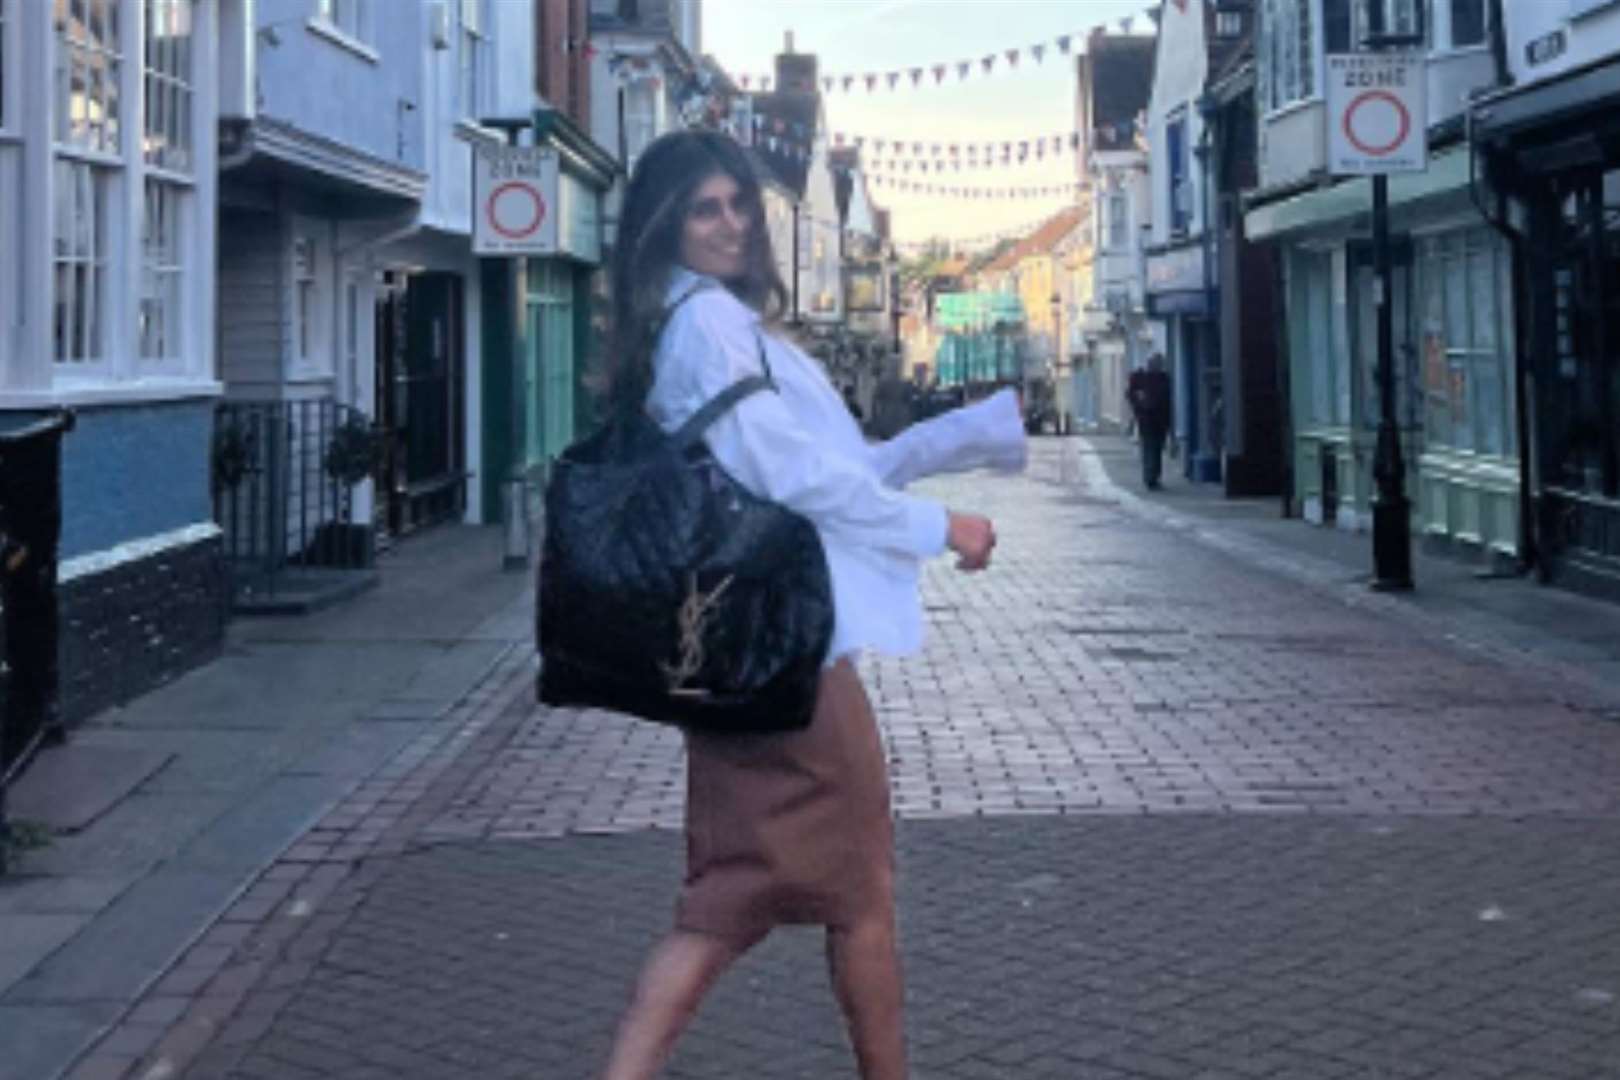 The world famous actress ventured into the centre of town. Picture: Mia Khalifa/Instagram